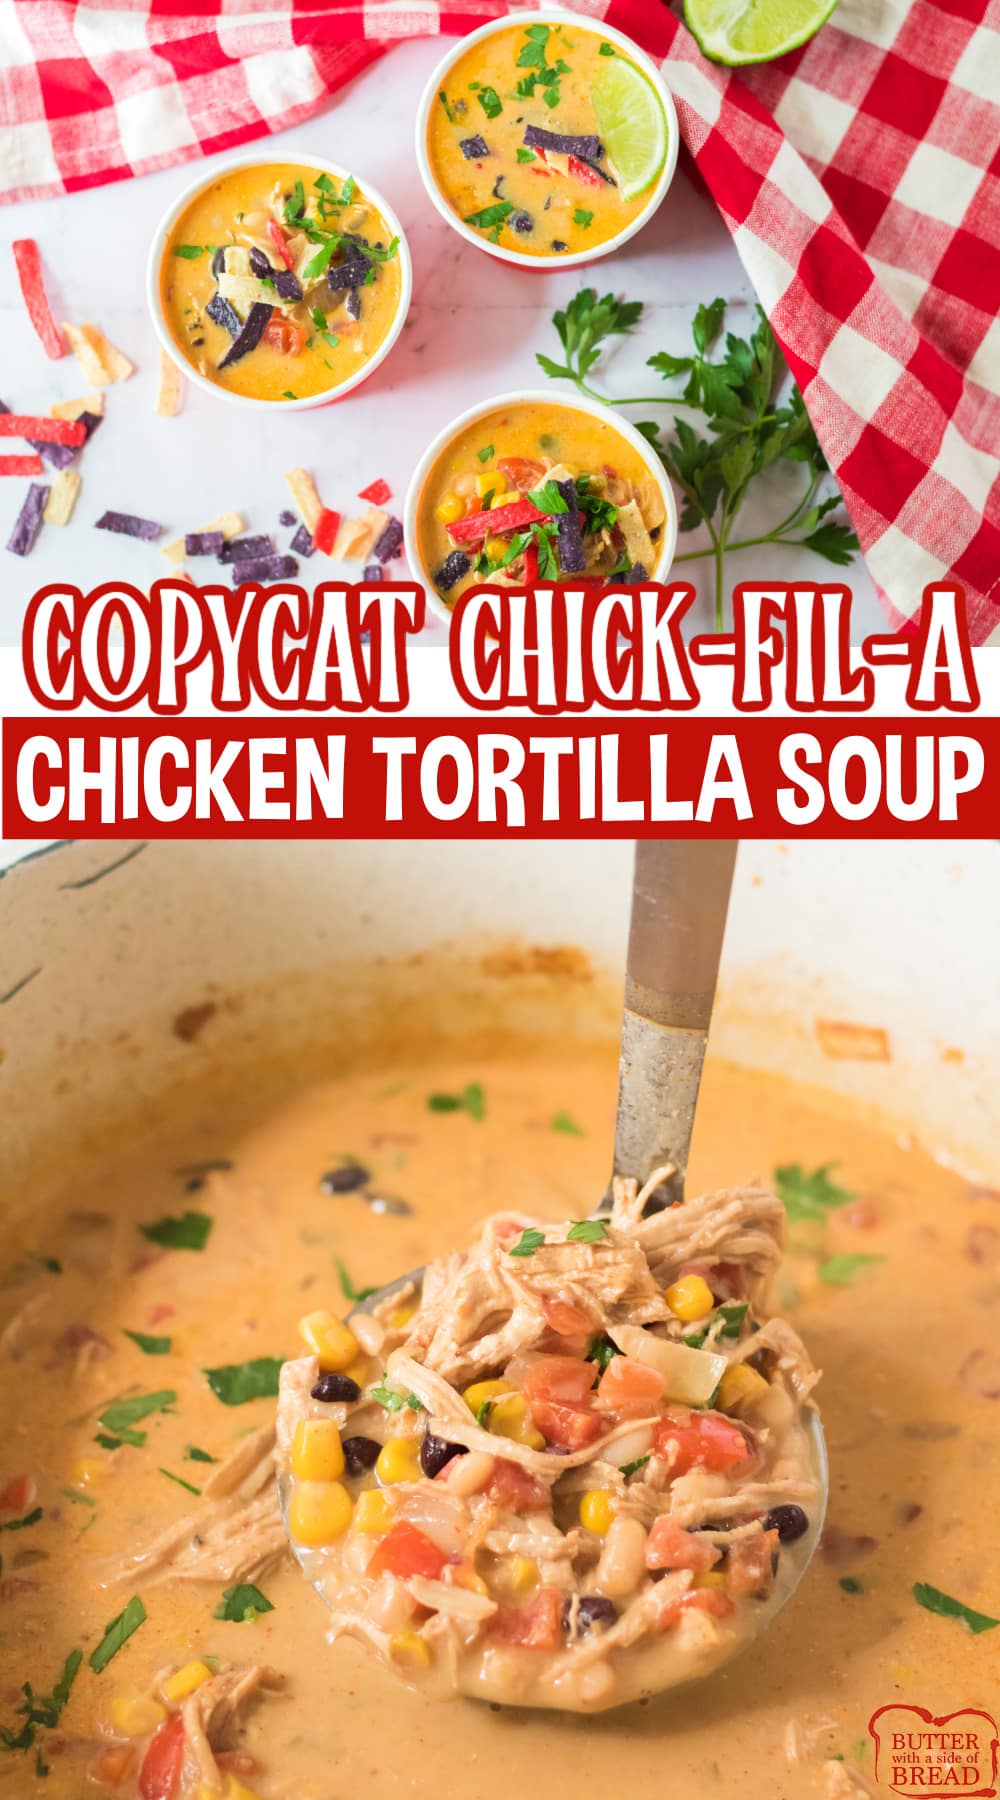 Copycat Chick-Fil-A Chicken Tortilla Soup is a creamy soup full of chicken, beans, corn and lots of flavor! Delicious chicken tortilla soup recipe that tastes just like the popular version you find at Chick-Fil-A! 